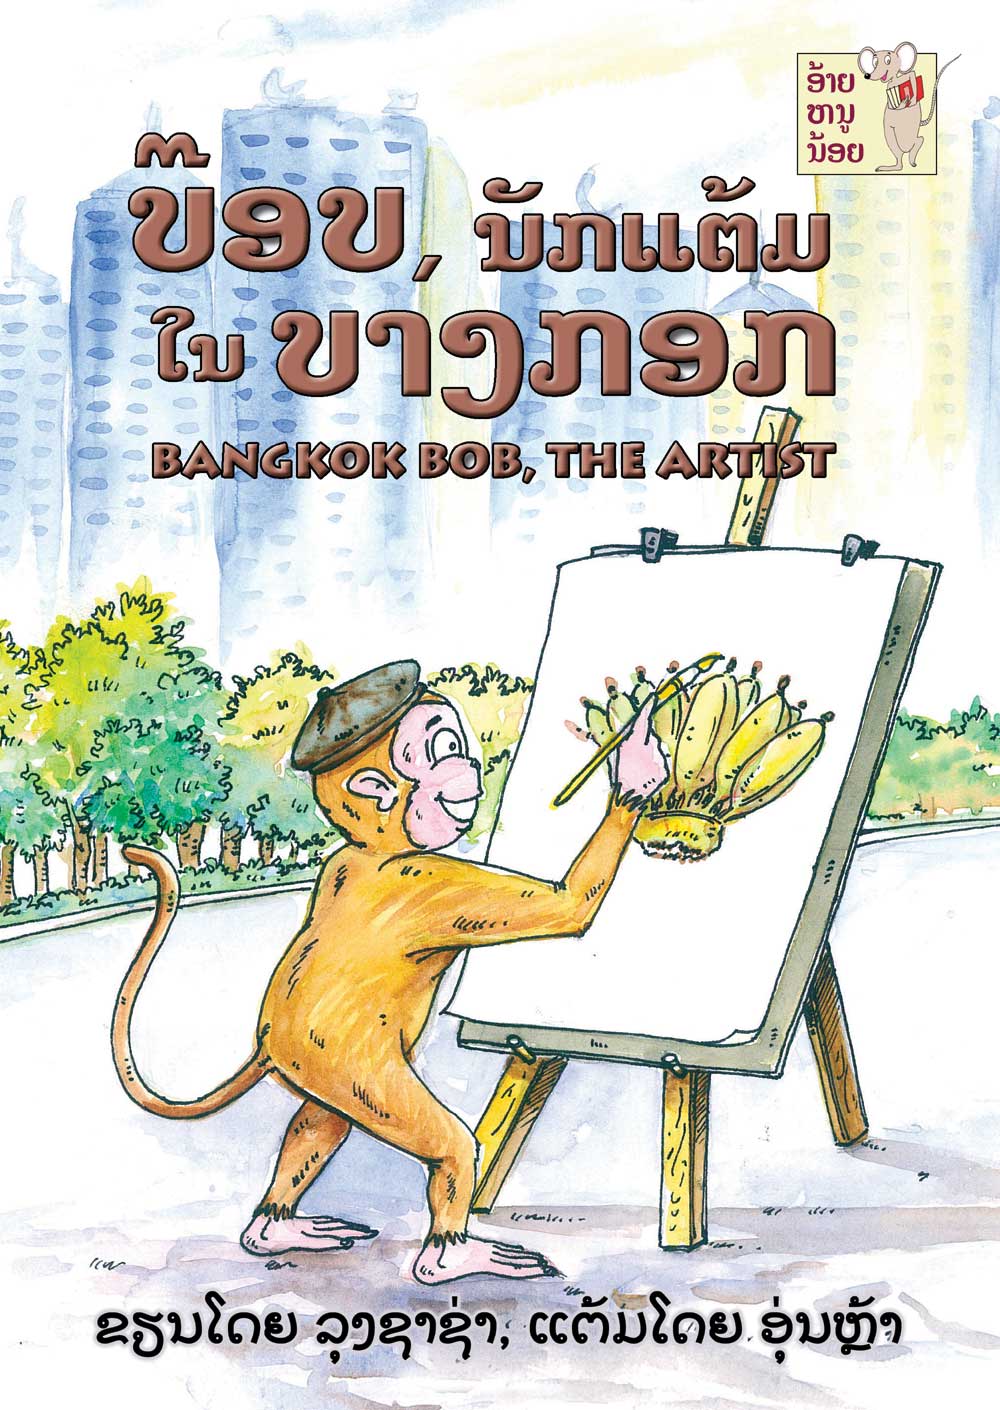 Bangkok Bob, the Artist large book cover, published in Lao language